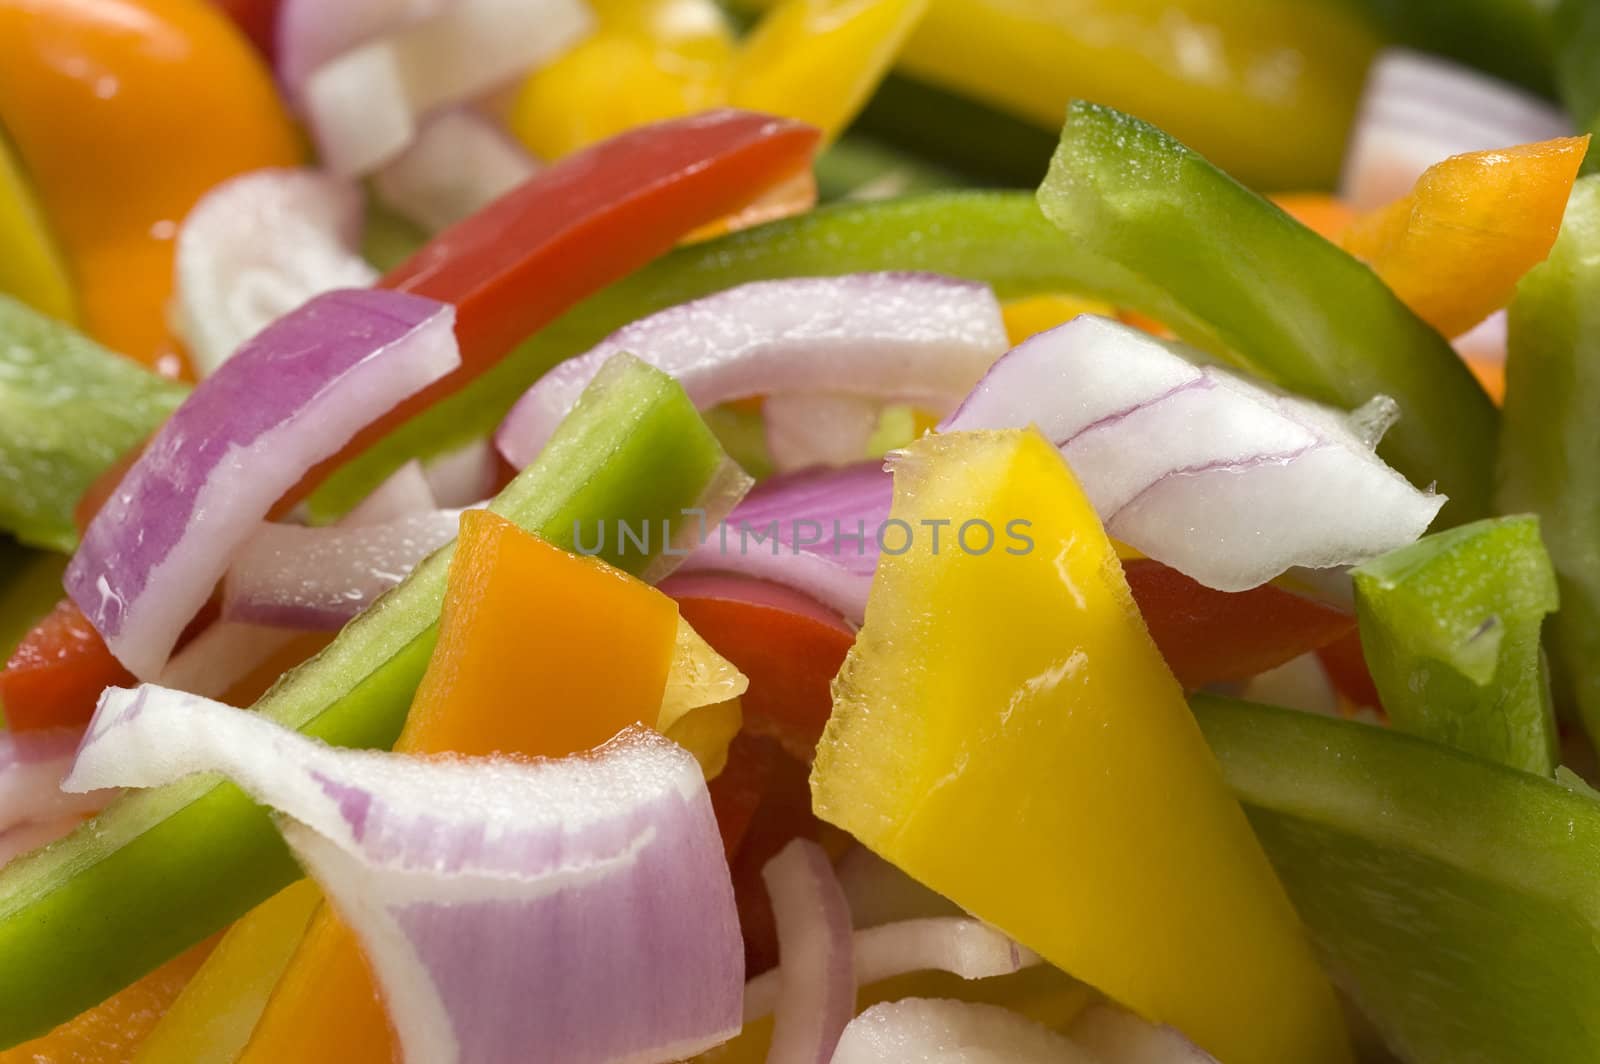 Chopped onions, green, yellow and red peppers ready for a stirfry